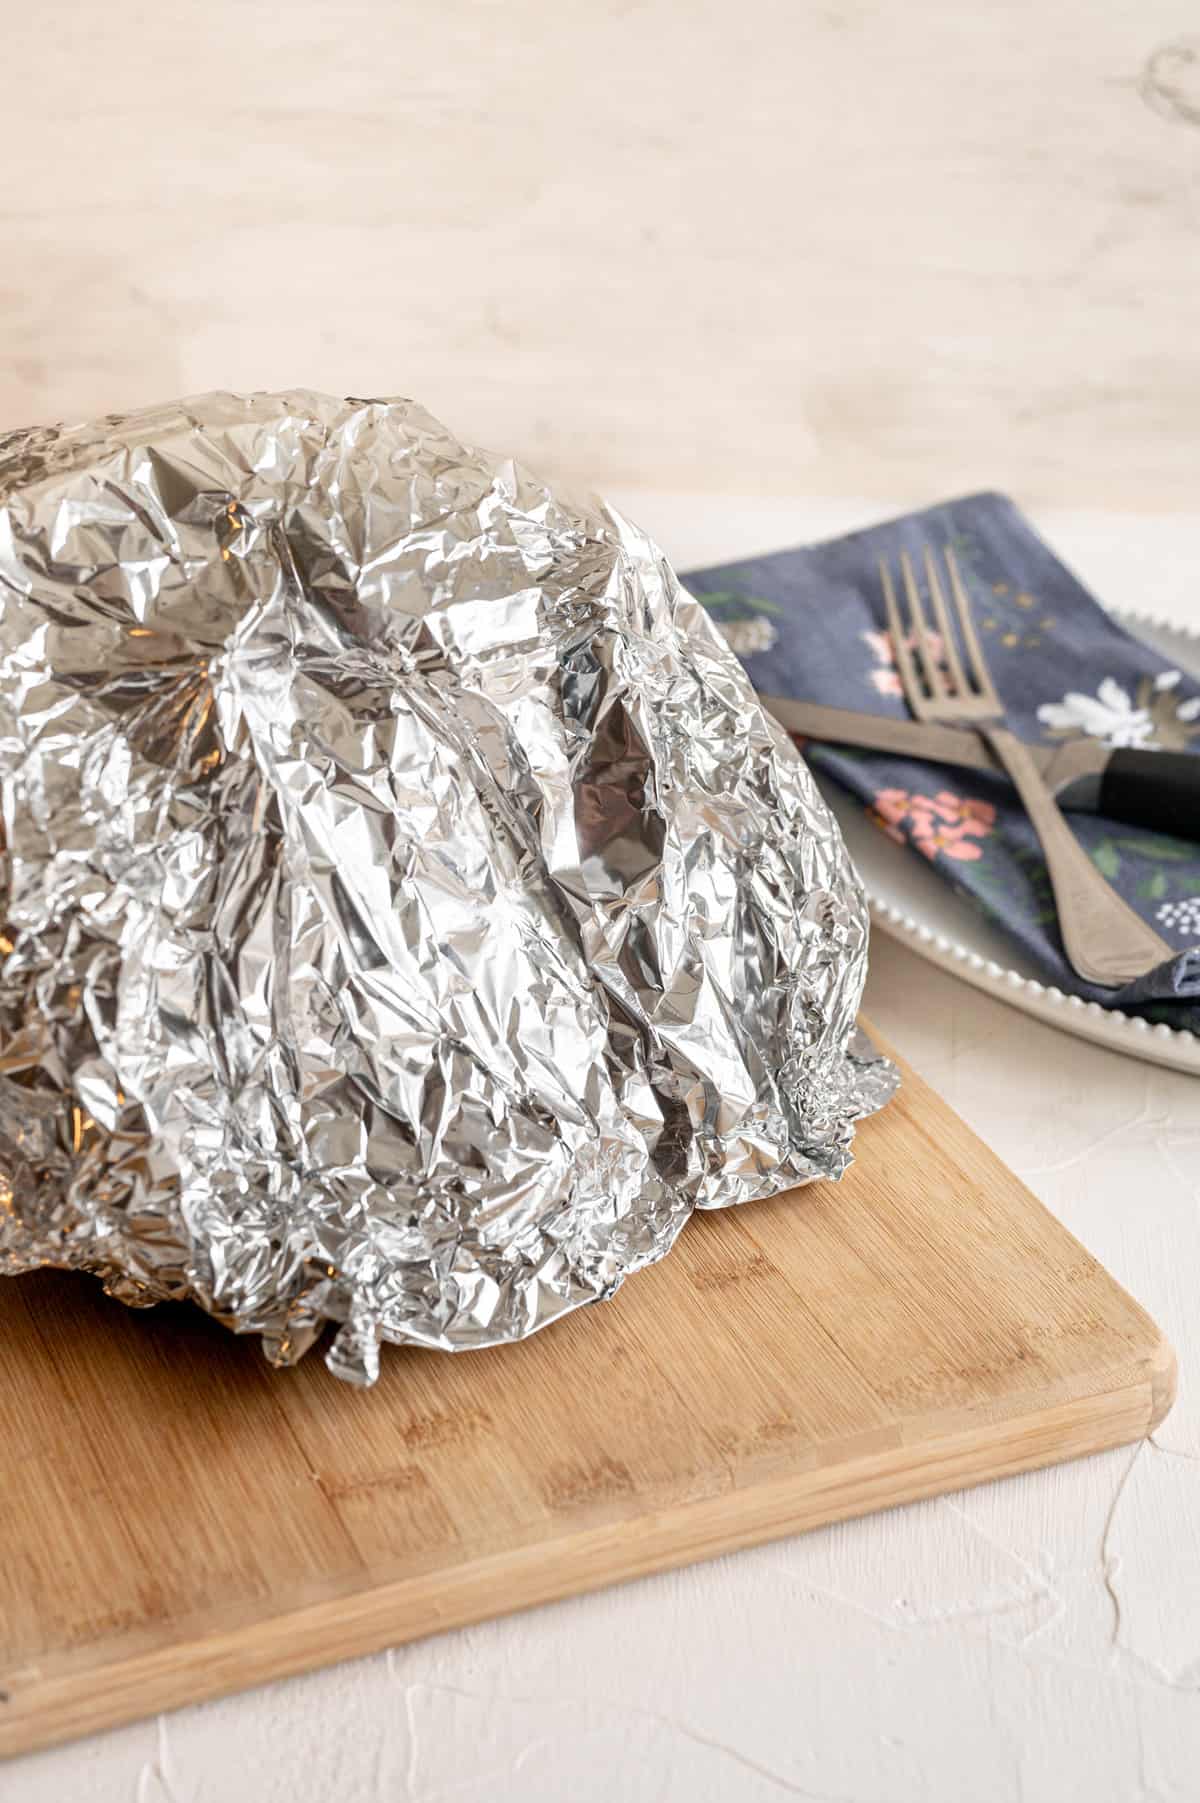 Foil covering a crock pot ham that is resting on a cutting board after cooking.